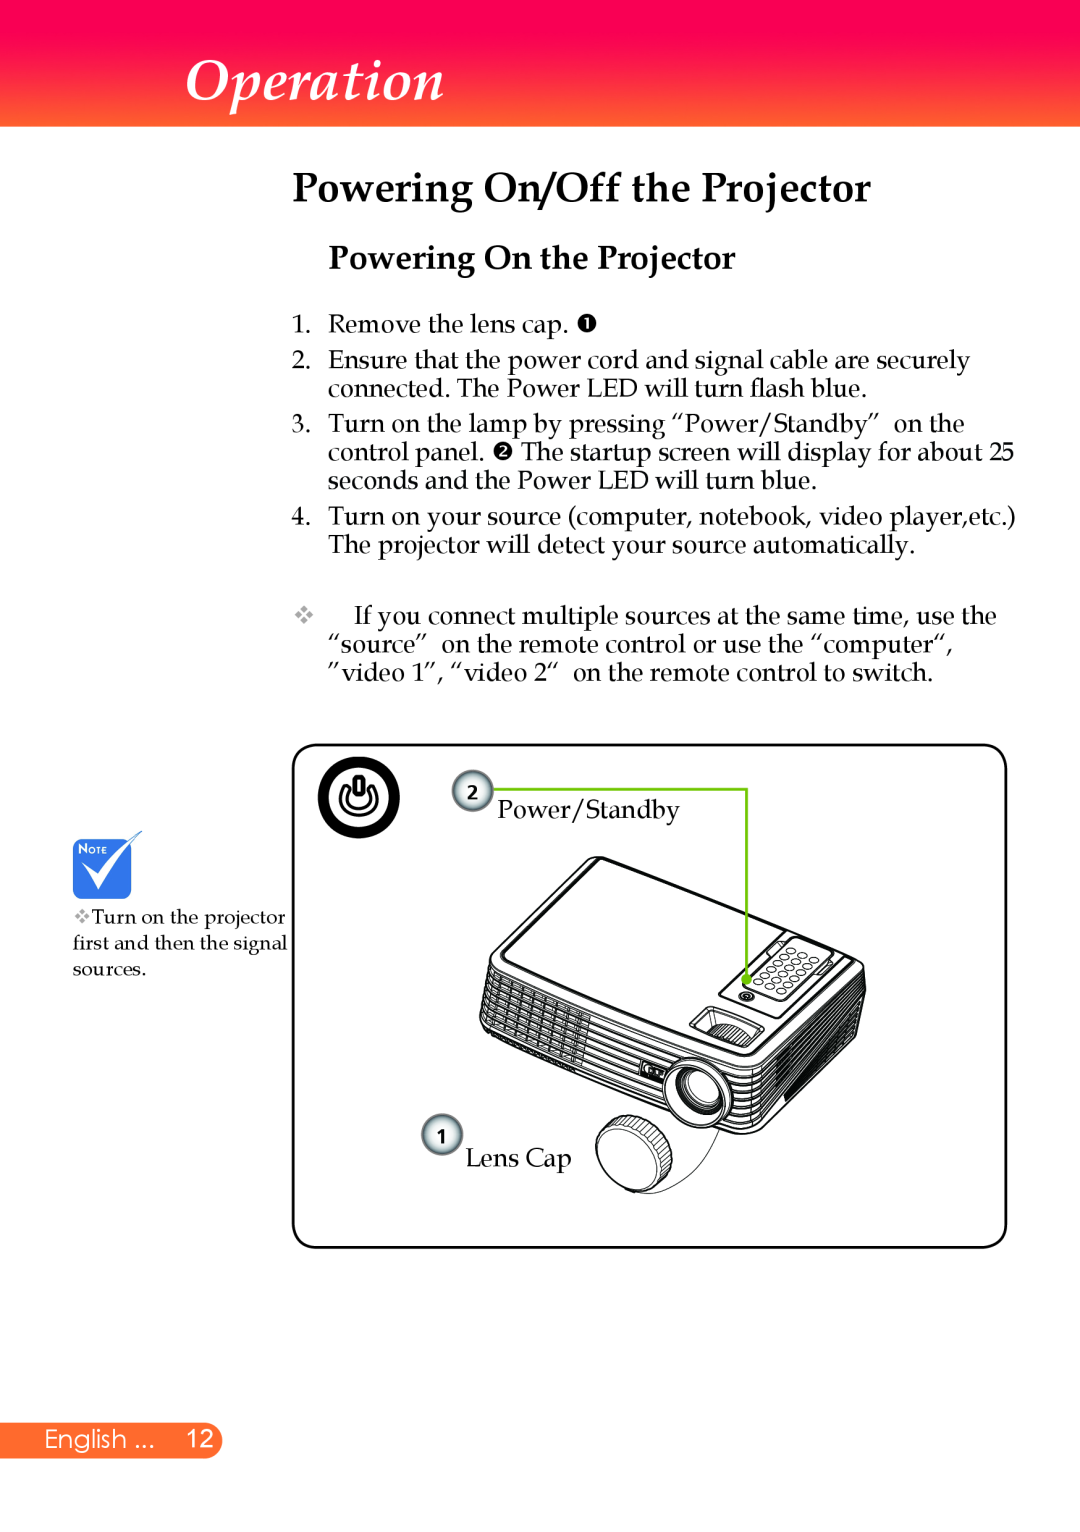 InFocus X9 manual Powering On/Off the Projector, Powering On the Projector, Operation, English 